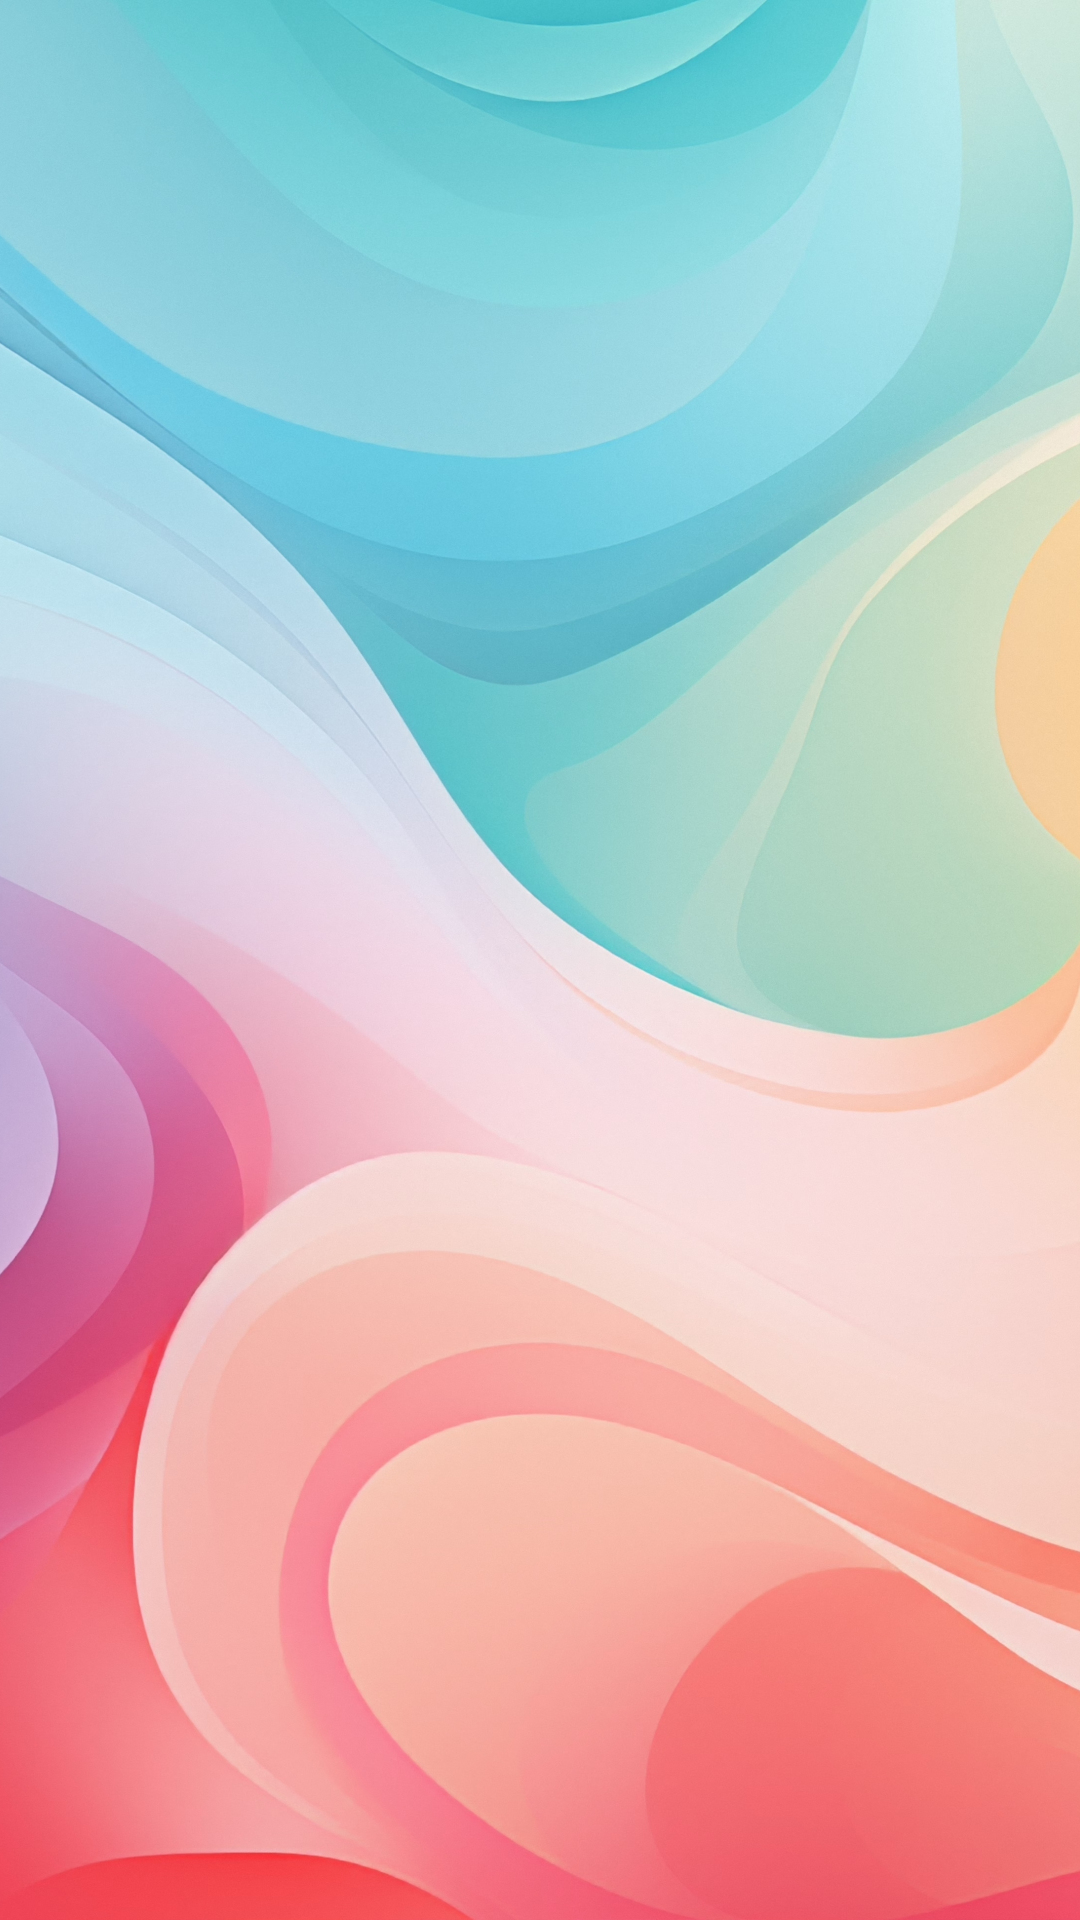 Art abstract, colorful, waves, 1080x1920 wallpaper